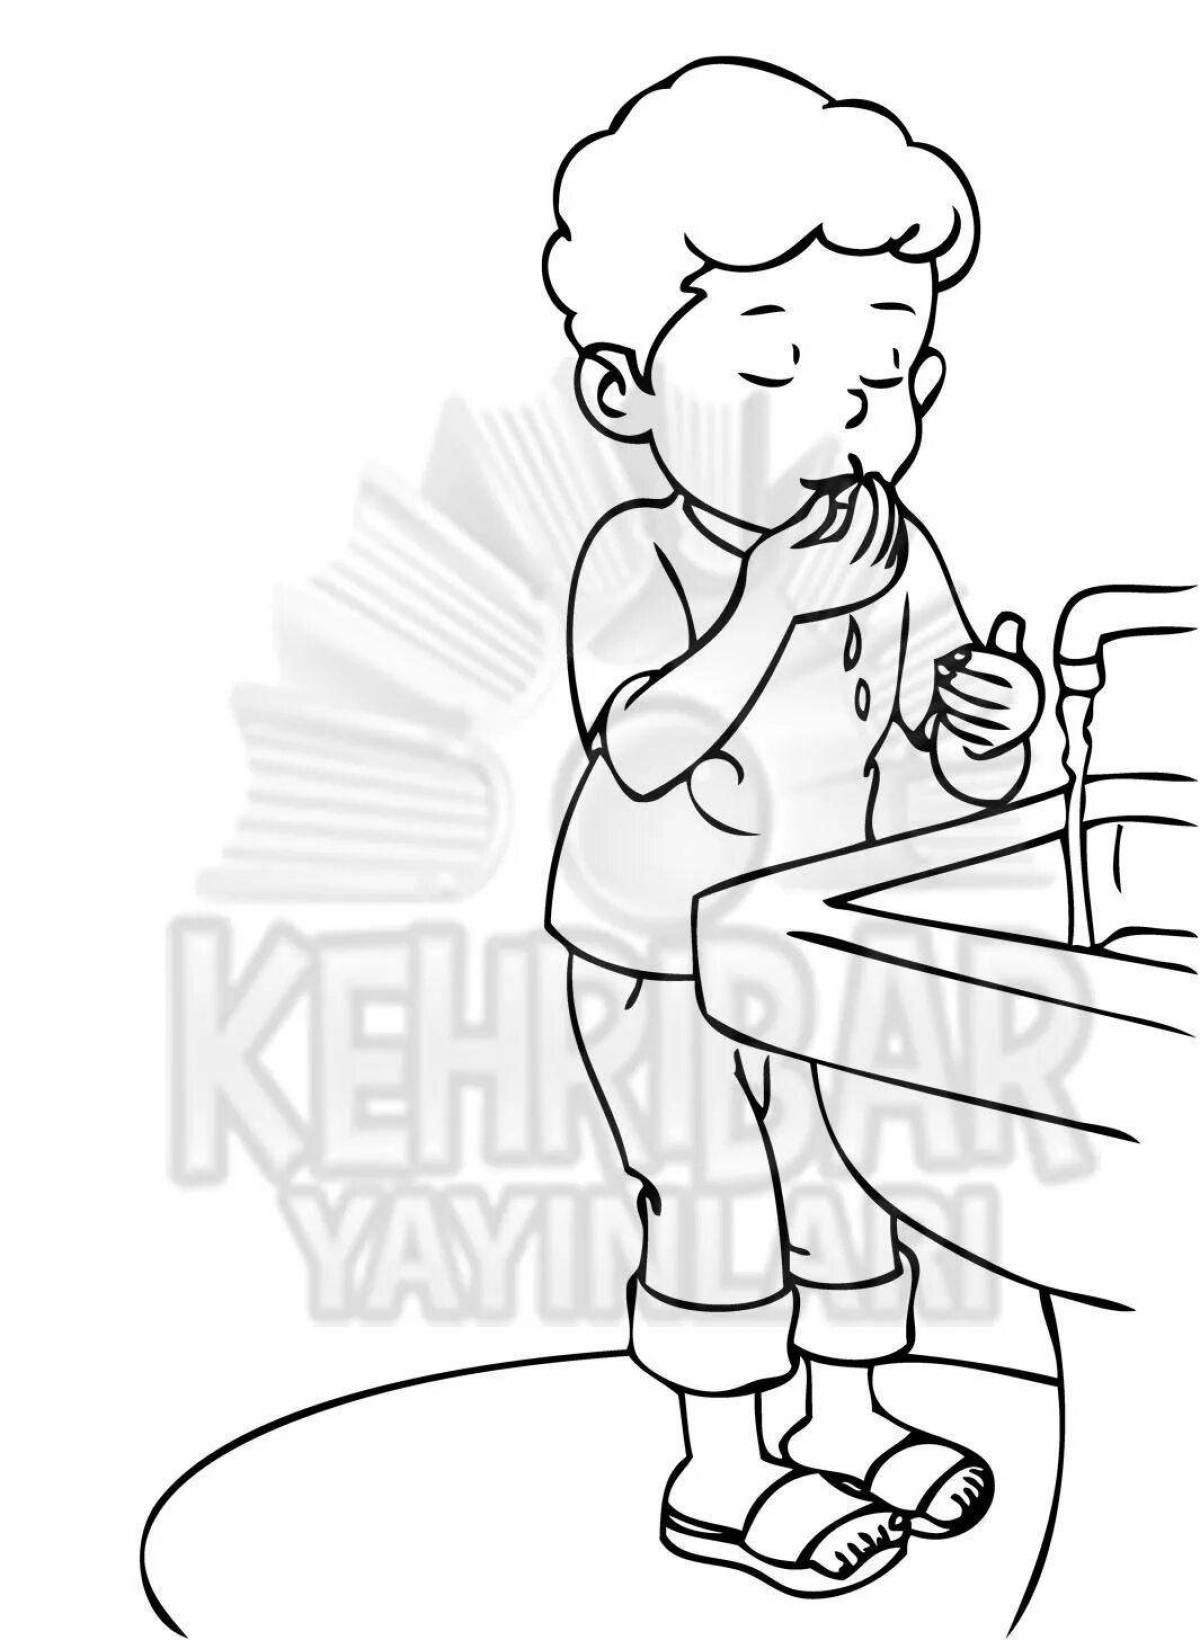 Dazzling i wash my face coloring page